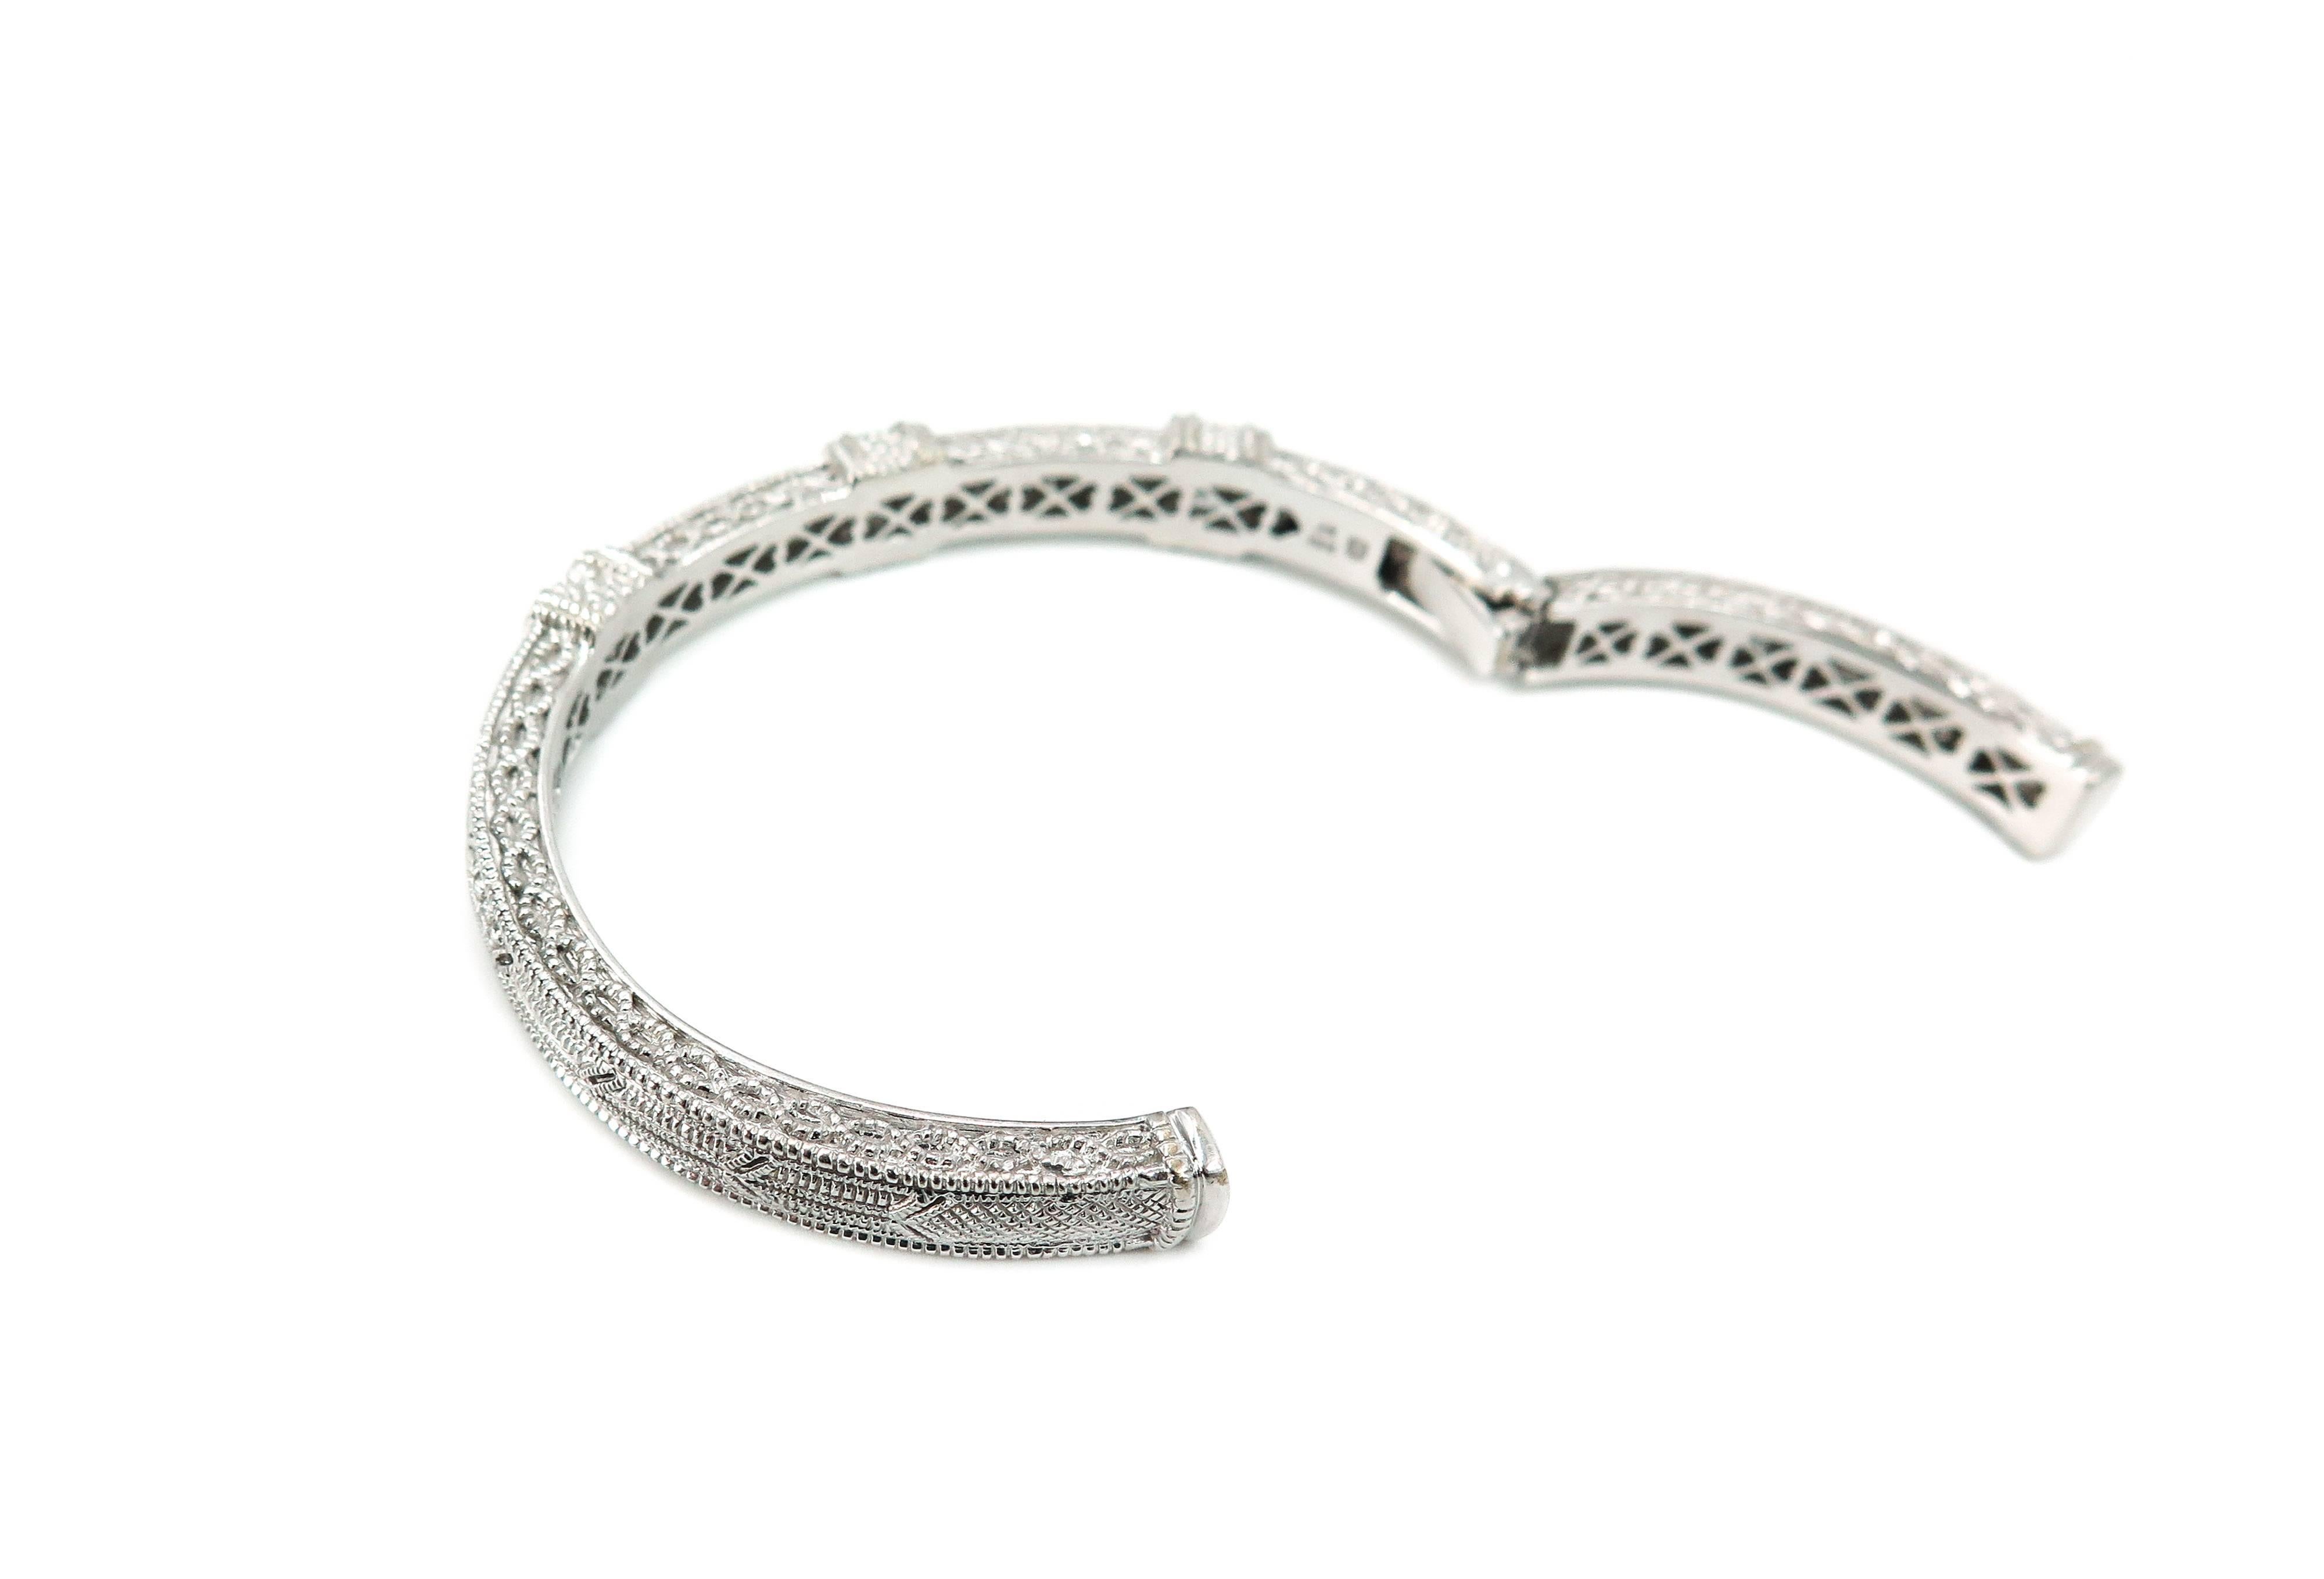 Judith Ripka combines beauty, and elegance in every design. 
This Bracelet is no different... Comprised of baguette and round diamonds, set in 18k white gold. 
Stunning and intricate lattice framework.
Size 7 inch 
